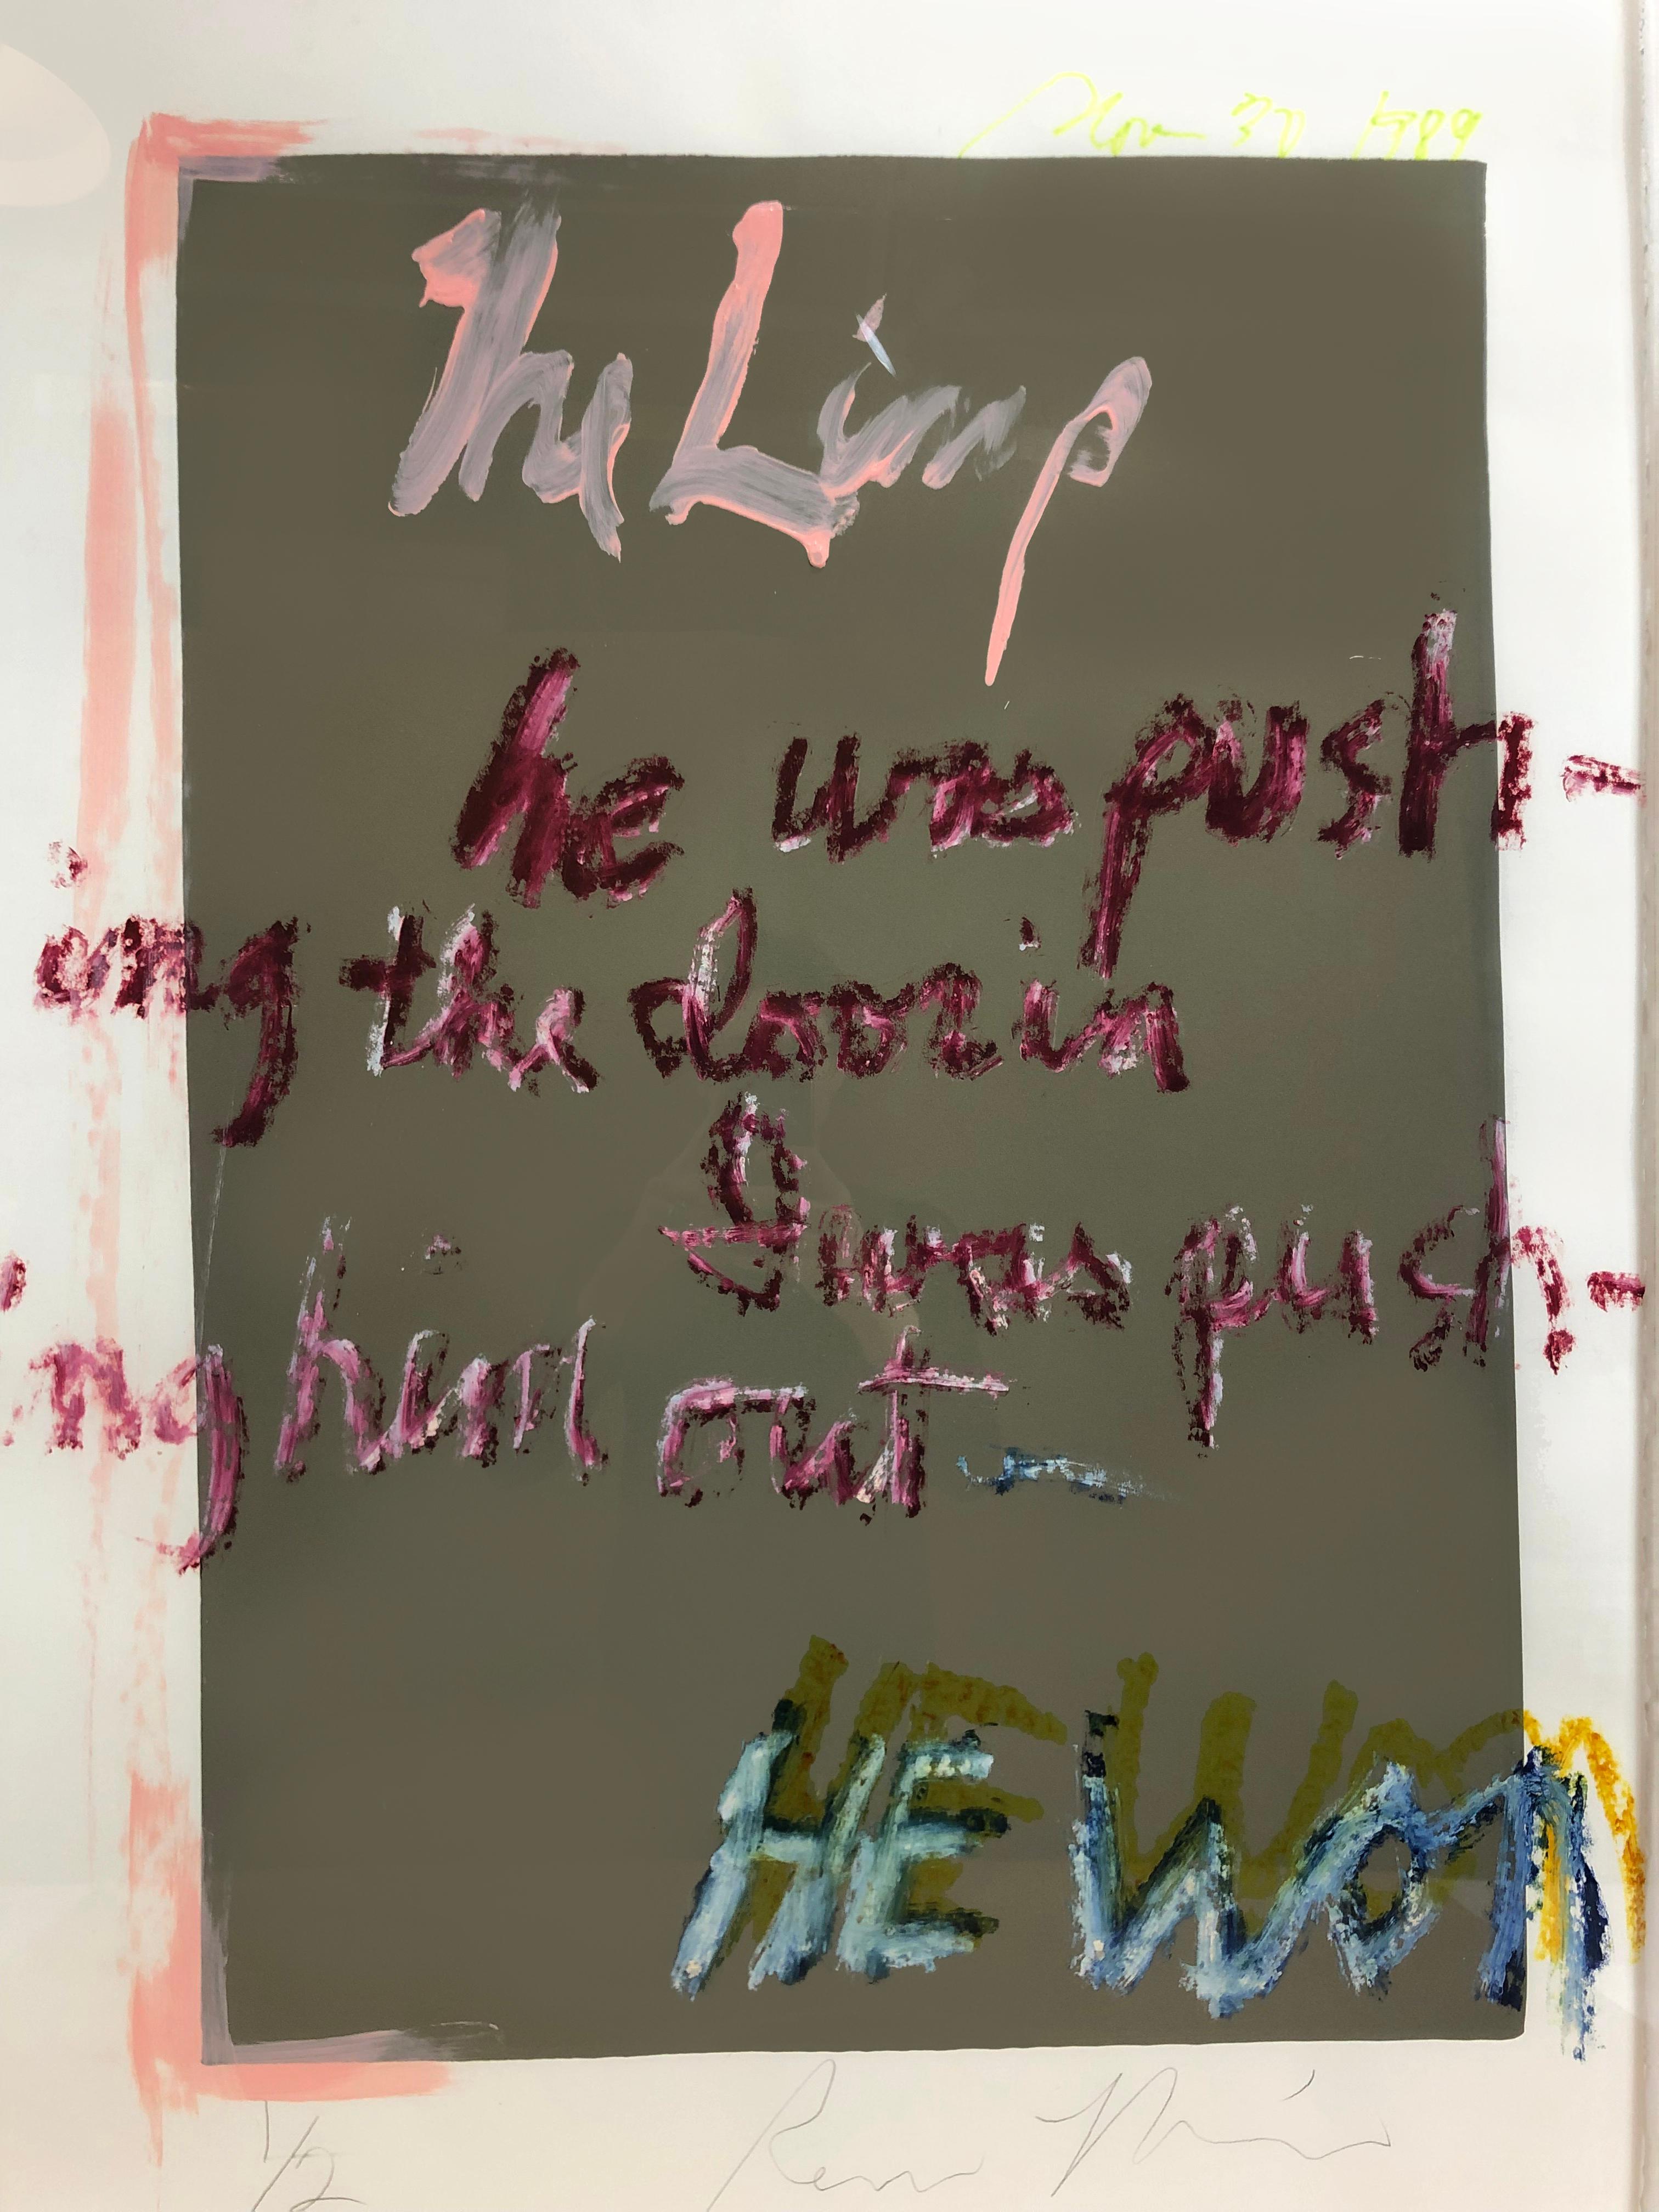 The Limp conjures the image of Rene consumed with energy and righteousness, then resignation: "He was pushing the door in, I was pushing him out / He won". The words are scrawled in pink, green and burgundy on a dark green khaki square. It’s